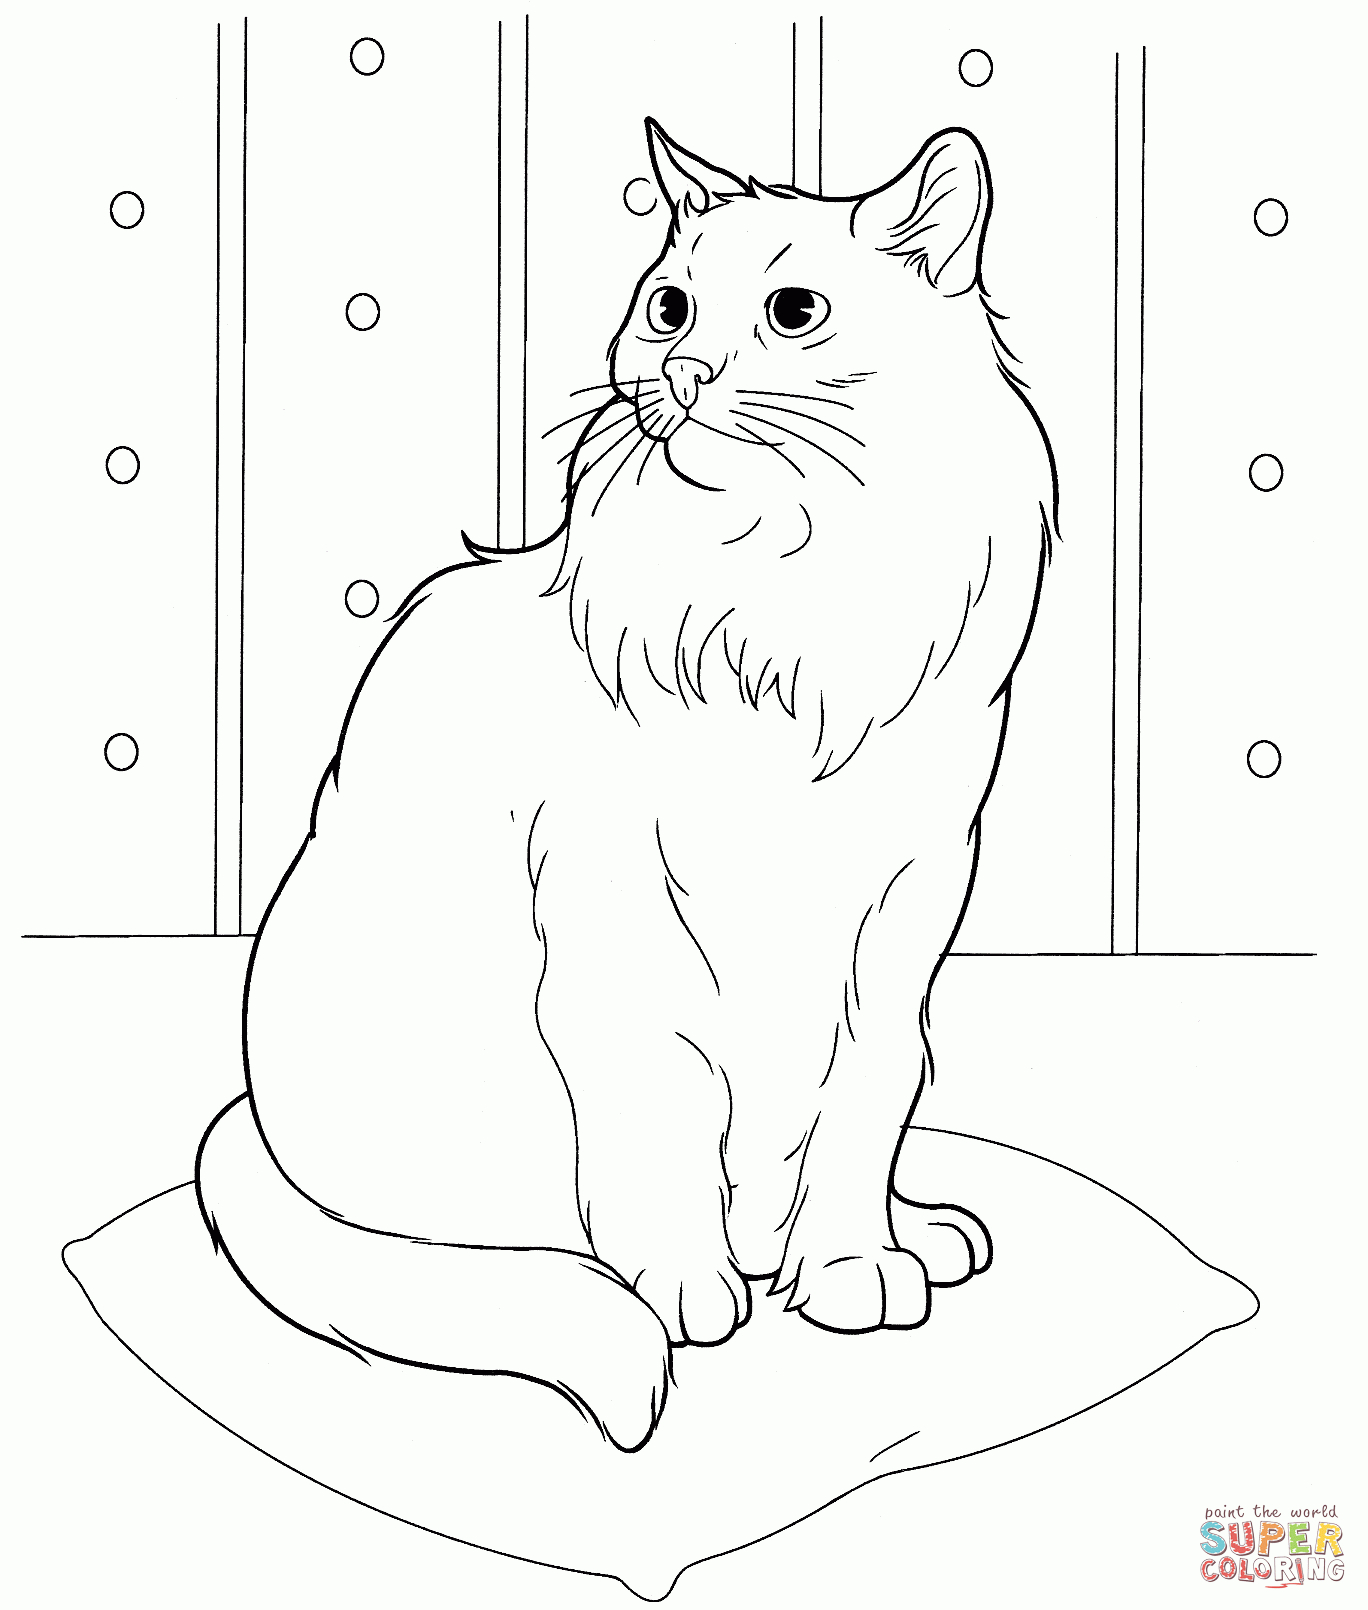 Cats Coloring Pages | Free Coloring Pages - Free Printable Cat Coloring Pages